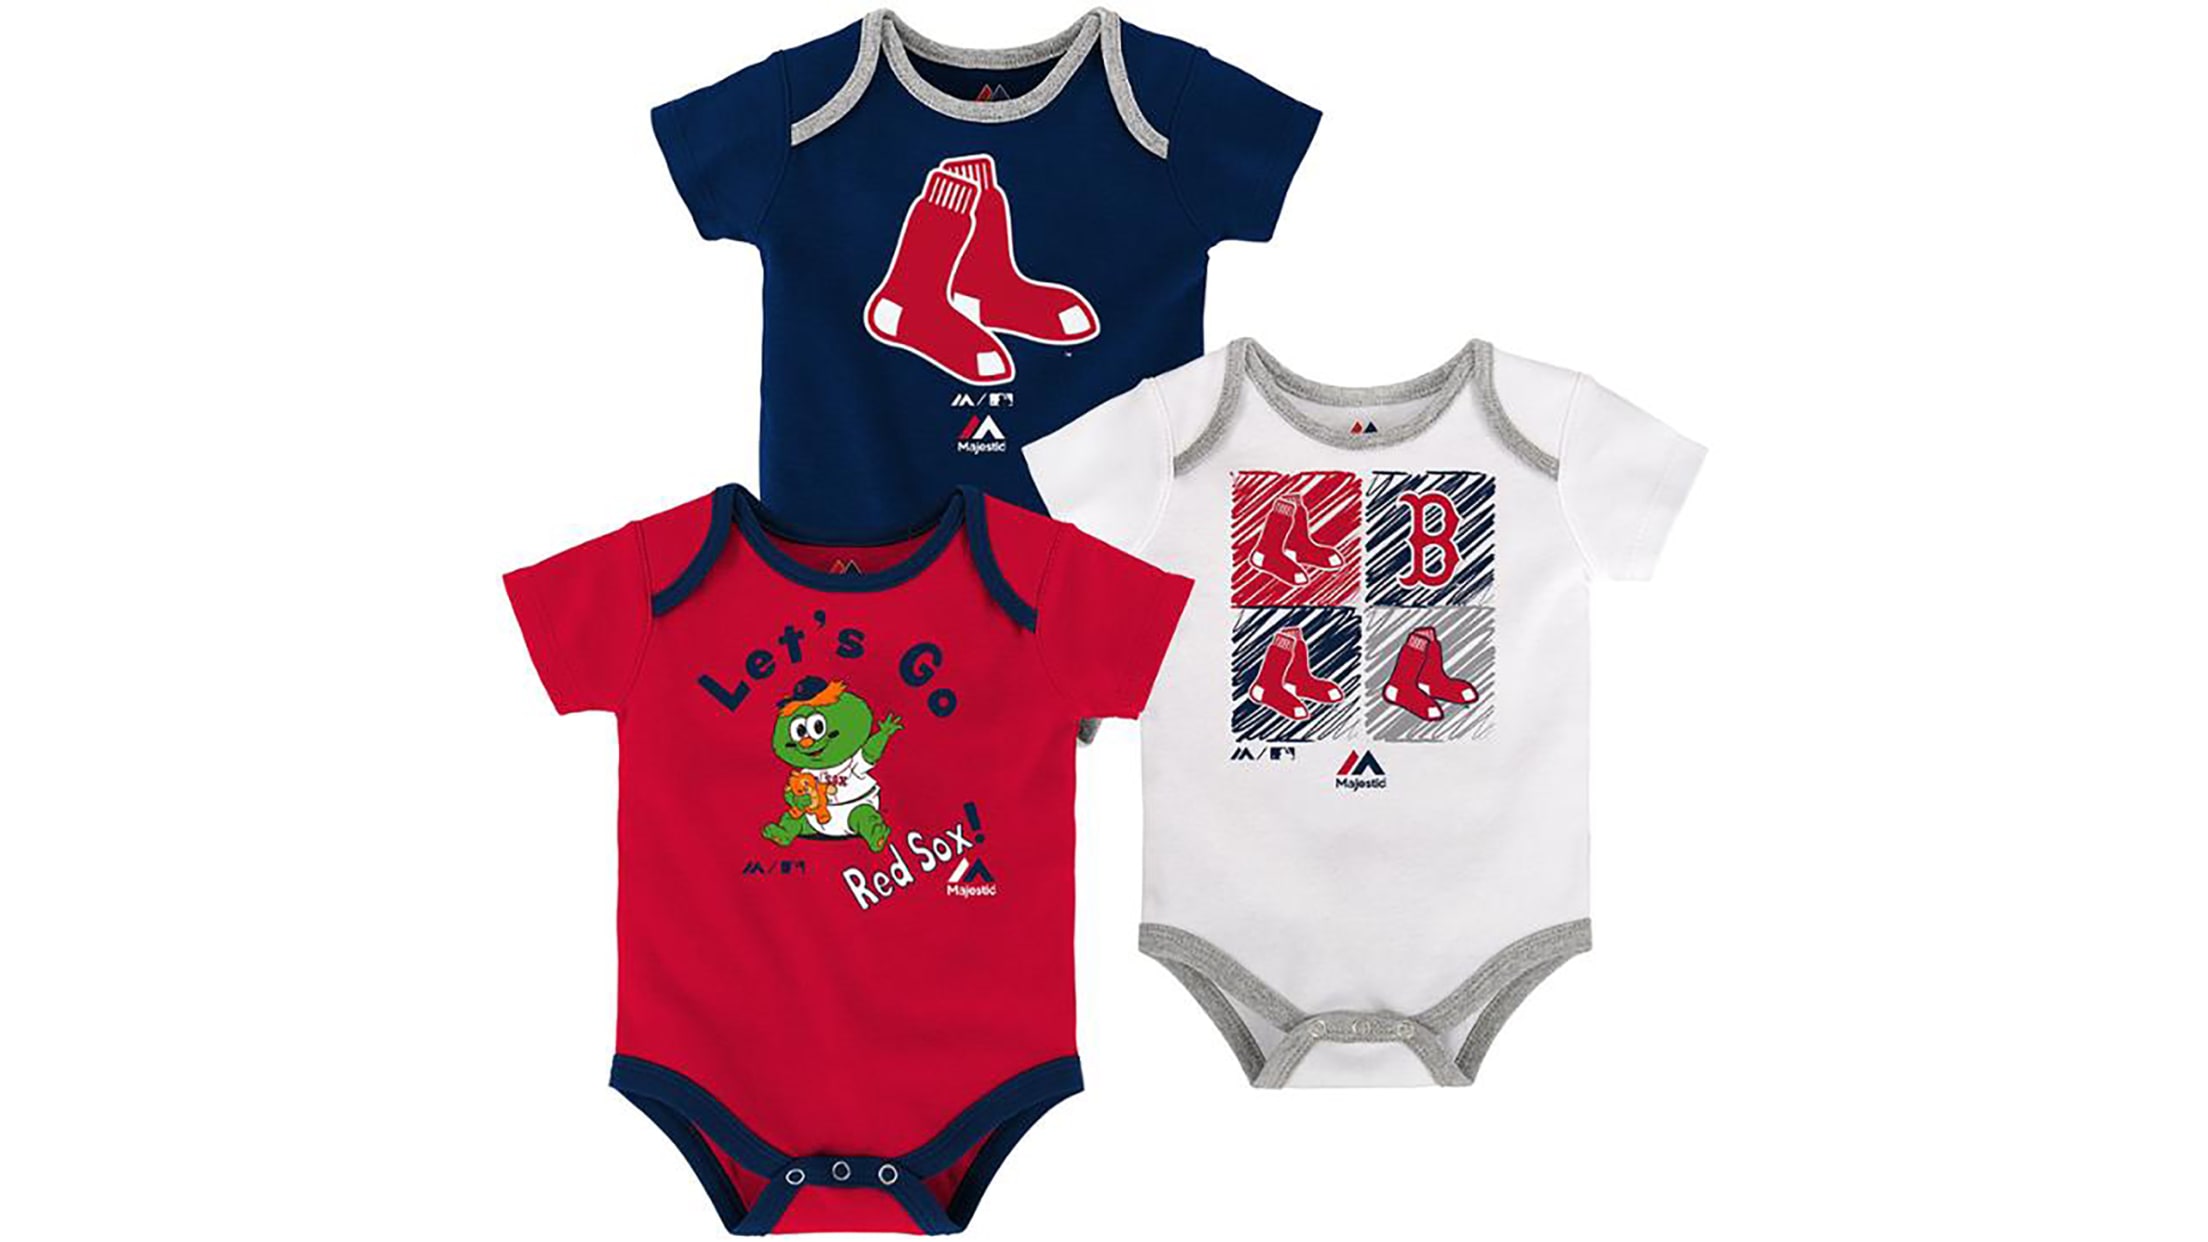 Majestic Boston Red Sox Toddler Home Run Shorts Set - Navy Blue/Red